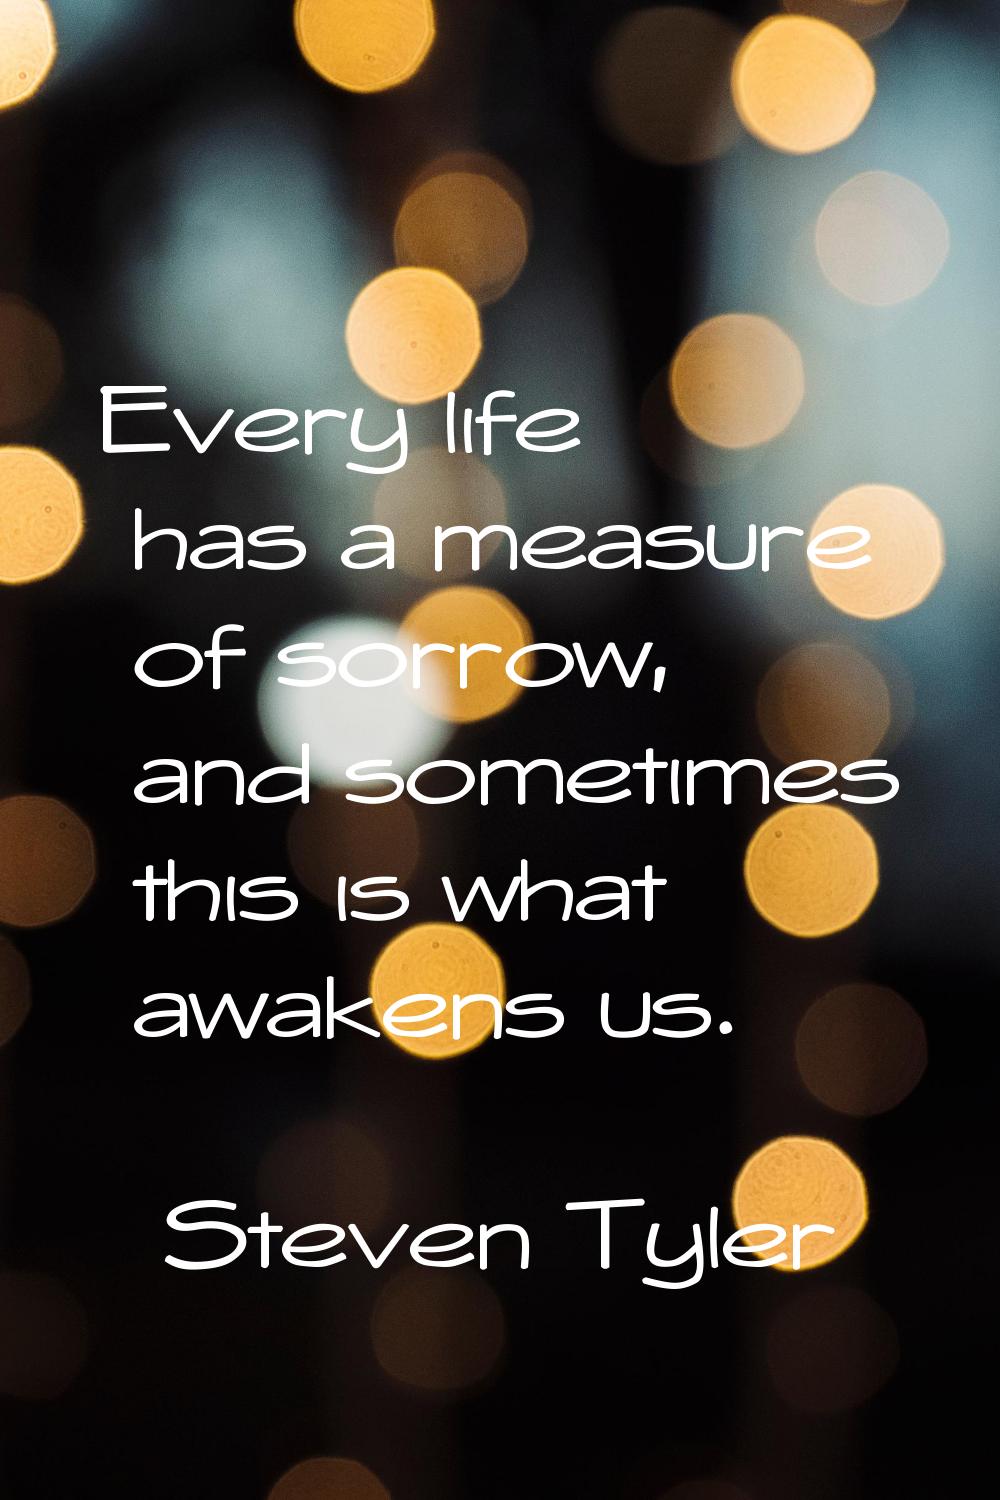 Every life has a measure of sorrow, and sometimes this is what awakens us.